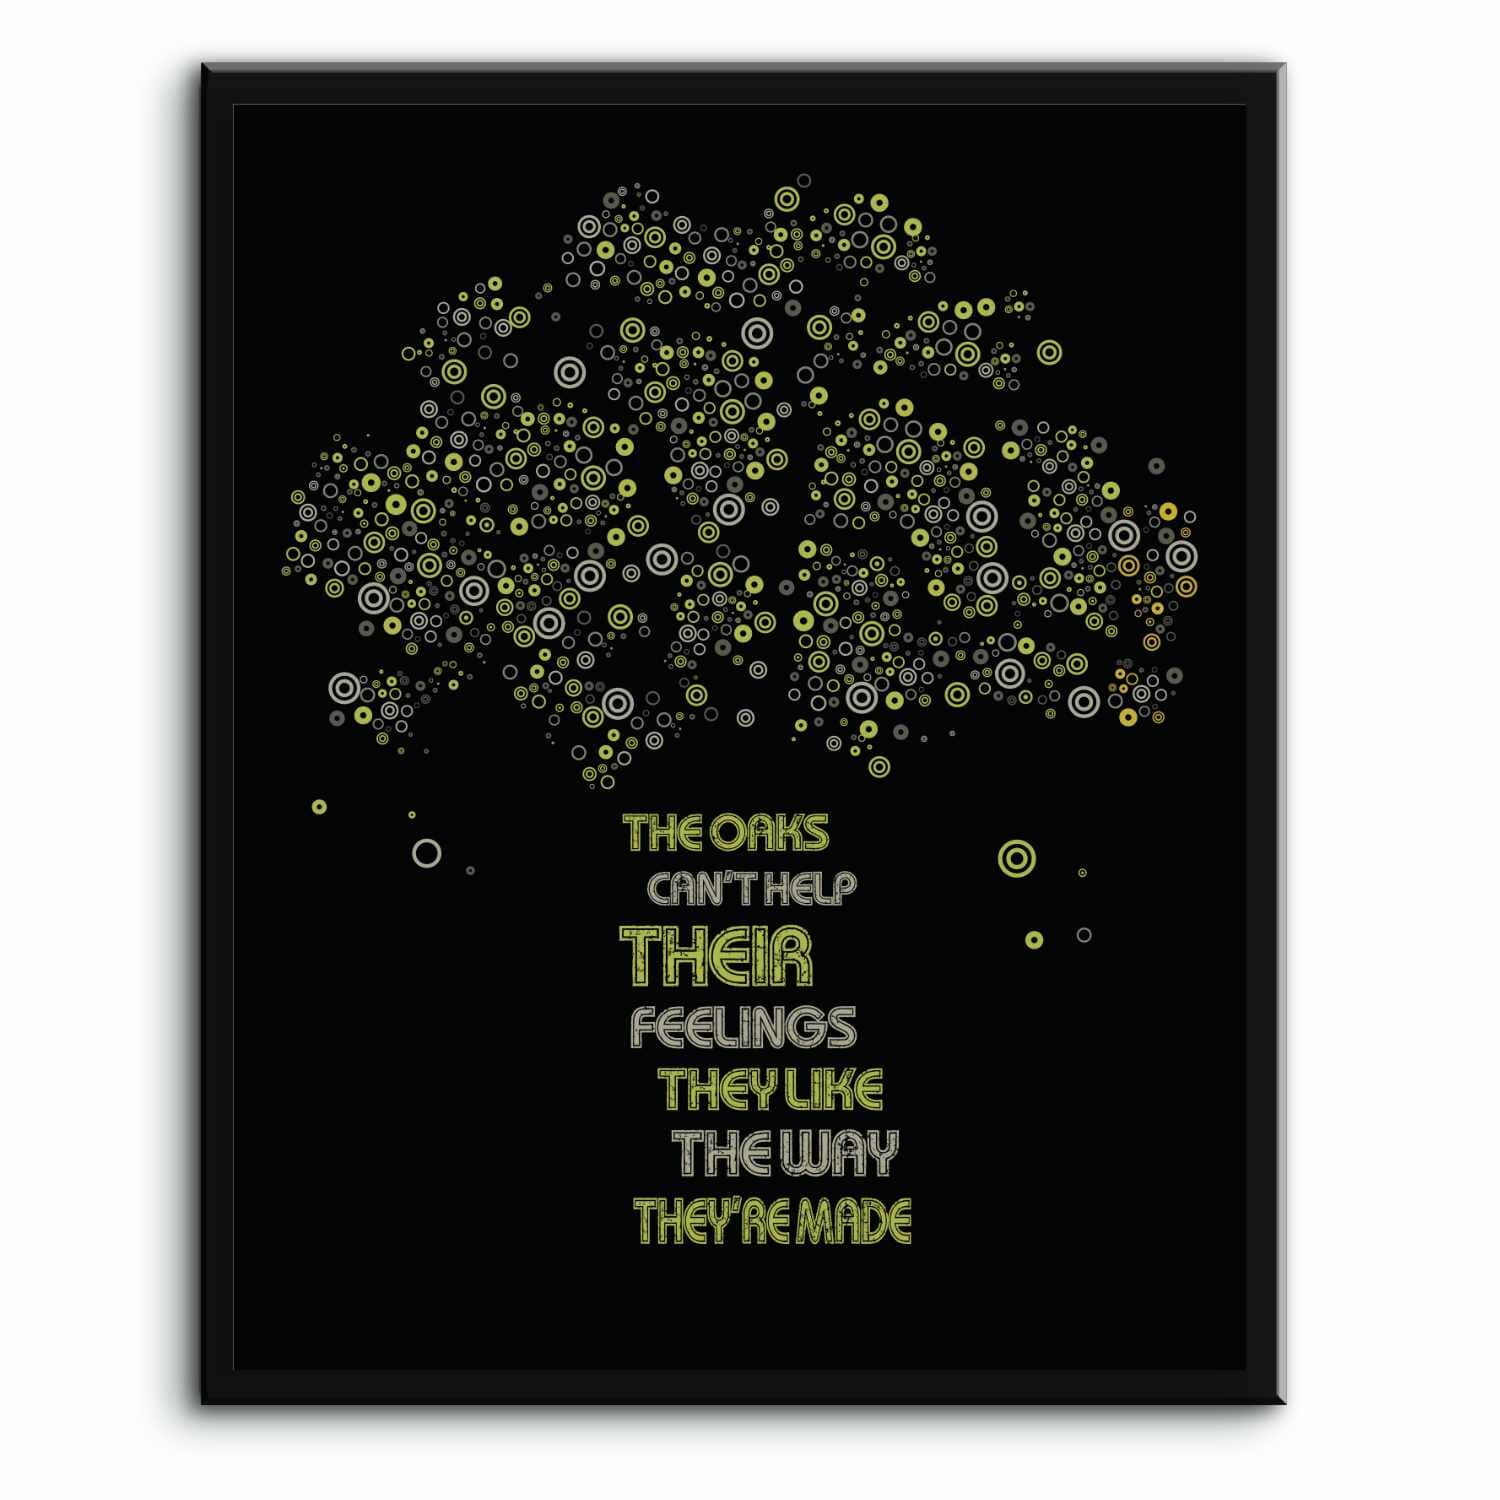 The Trees by Rush - Lyric Inspired Song Art Rock Music Print Song Lyrics Art Song Lyrics Art 8x10 Plaque Mount 